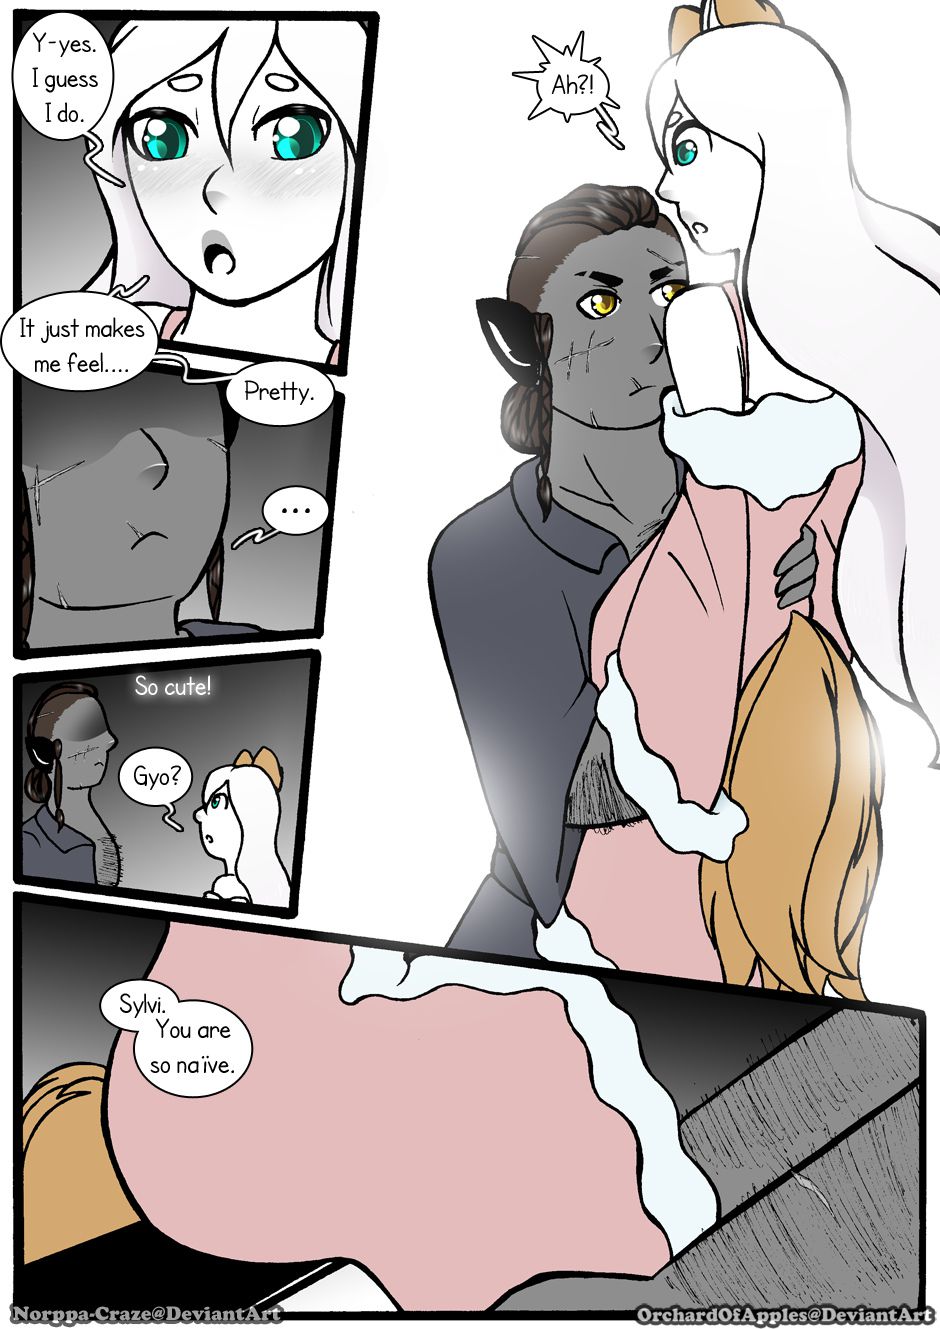 [Jeny-jen94] Between Kings and Queens [Ongoing] 346